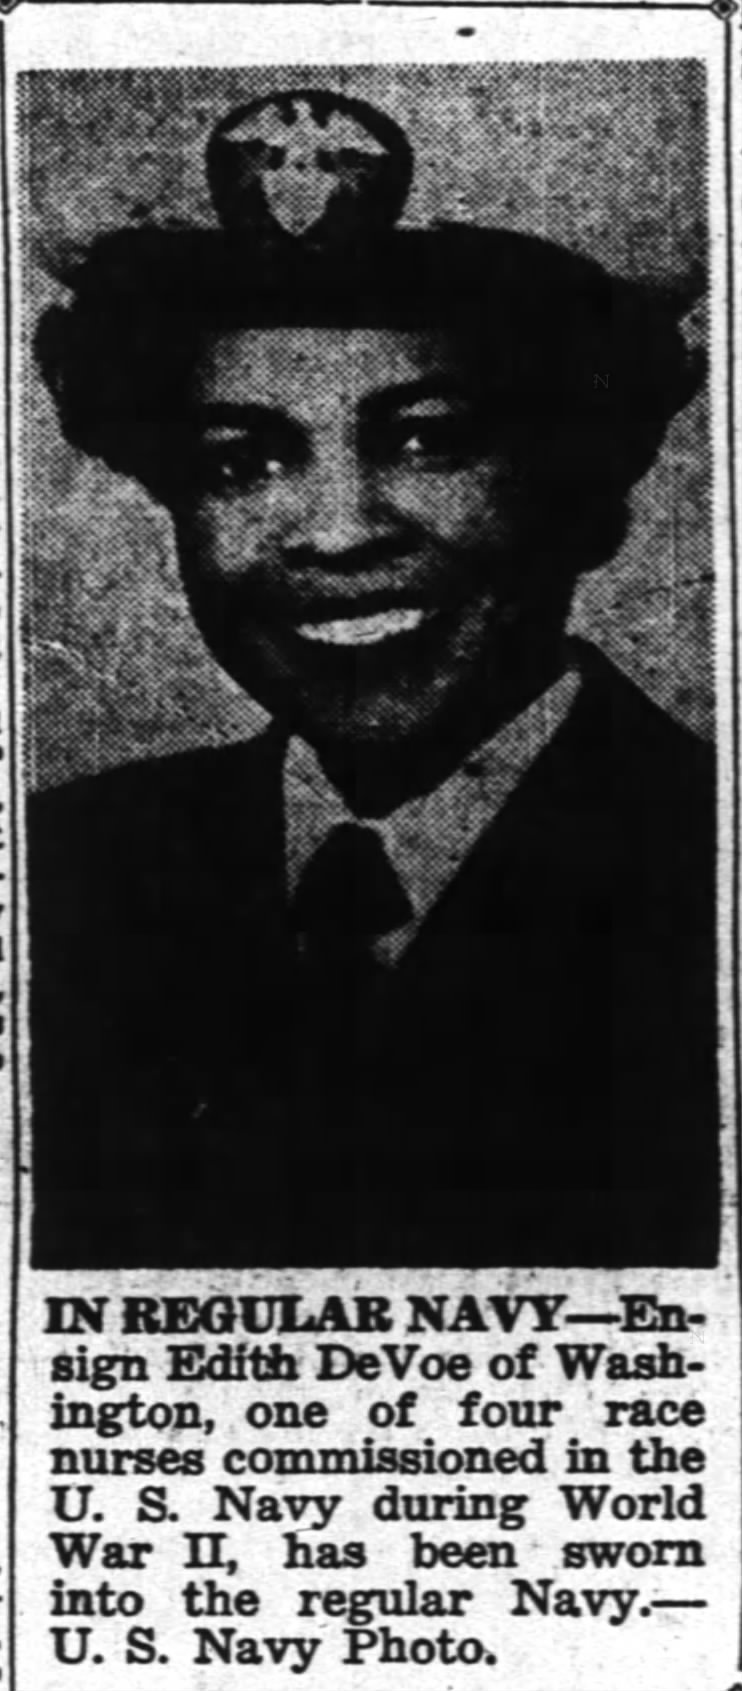 In Regular Navy. The Pittsburgh Courier (Pittsburgh,Pennsylvania) 31 January 1948, p 1